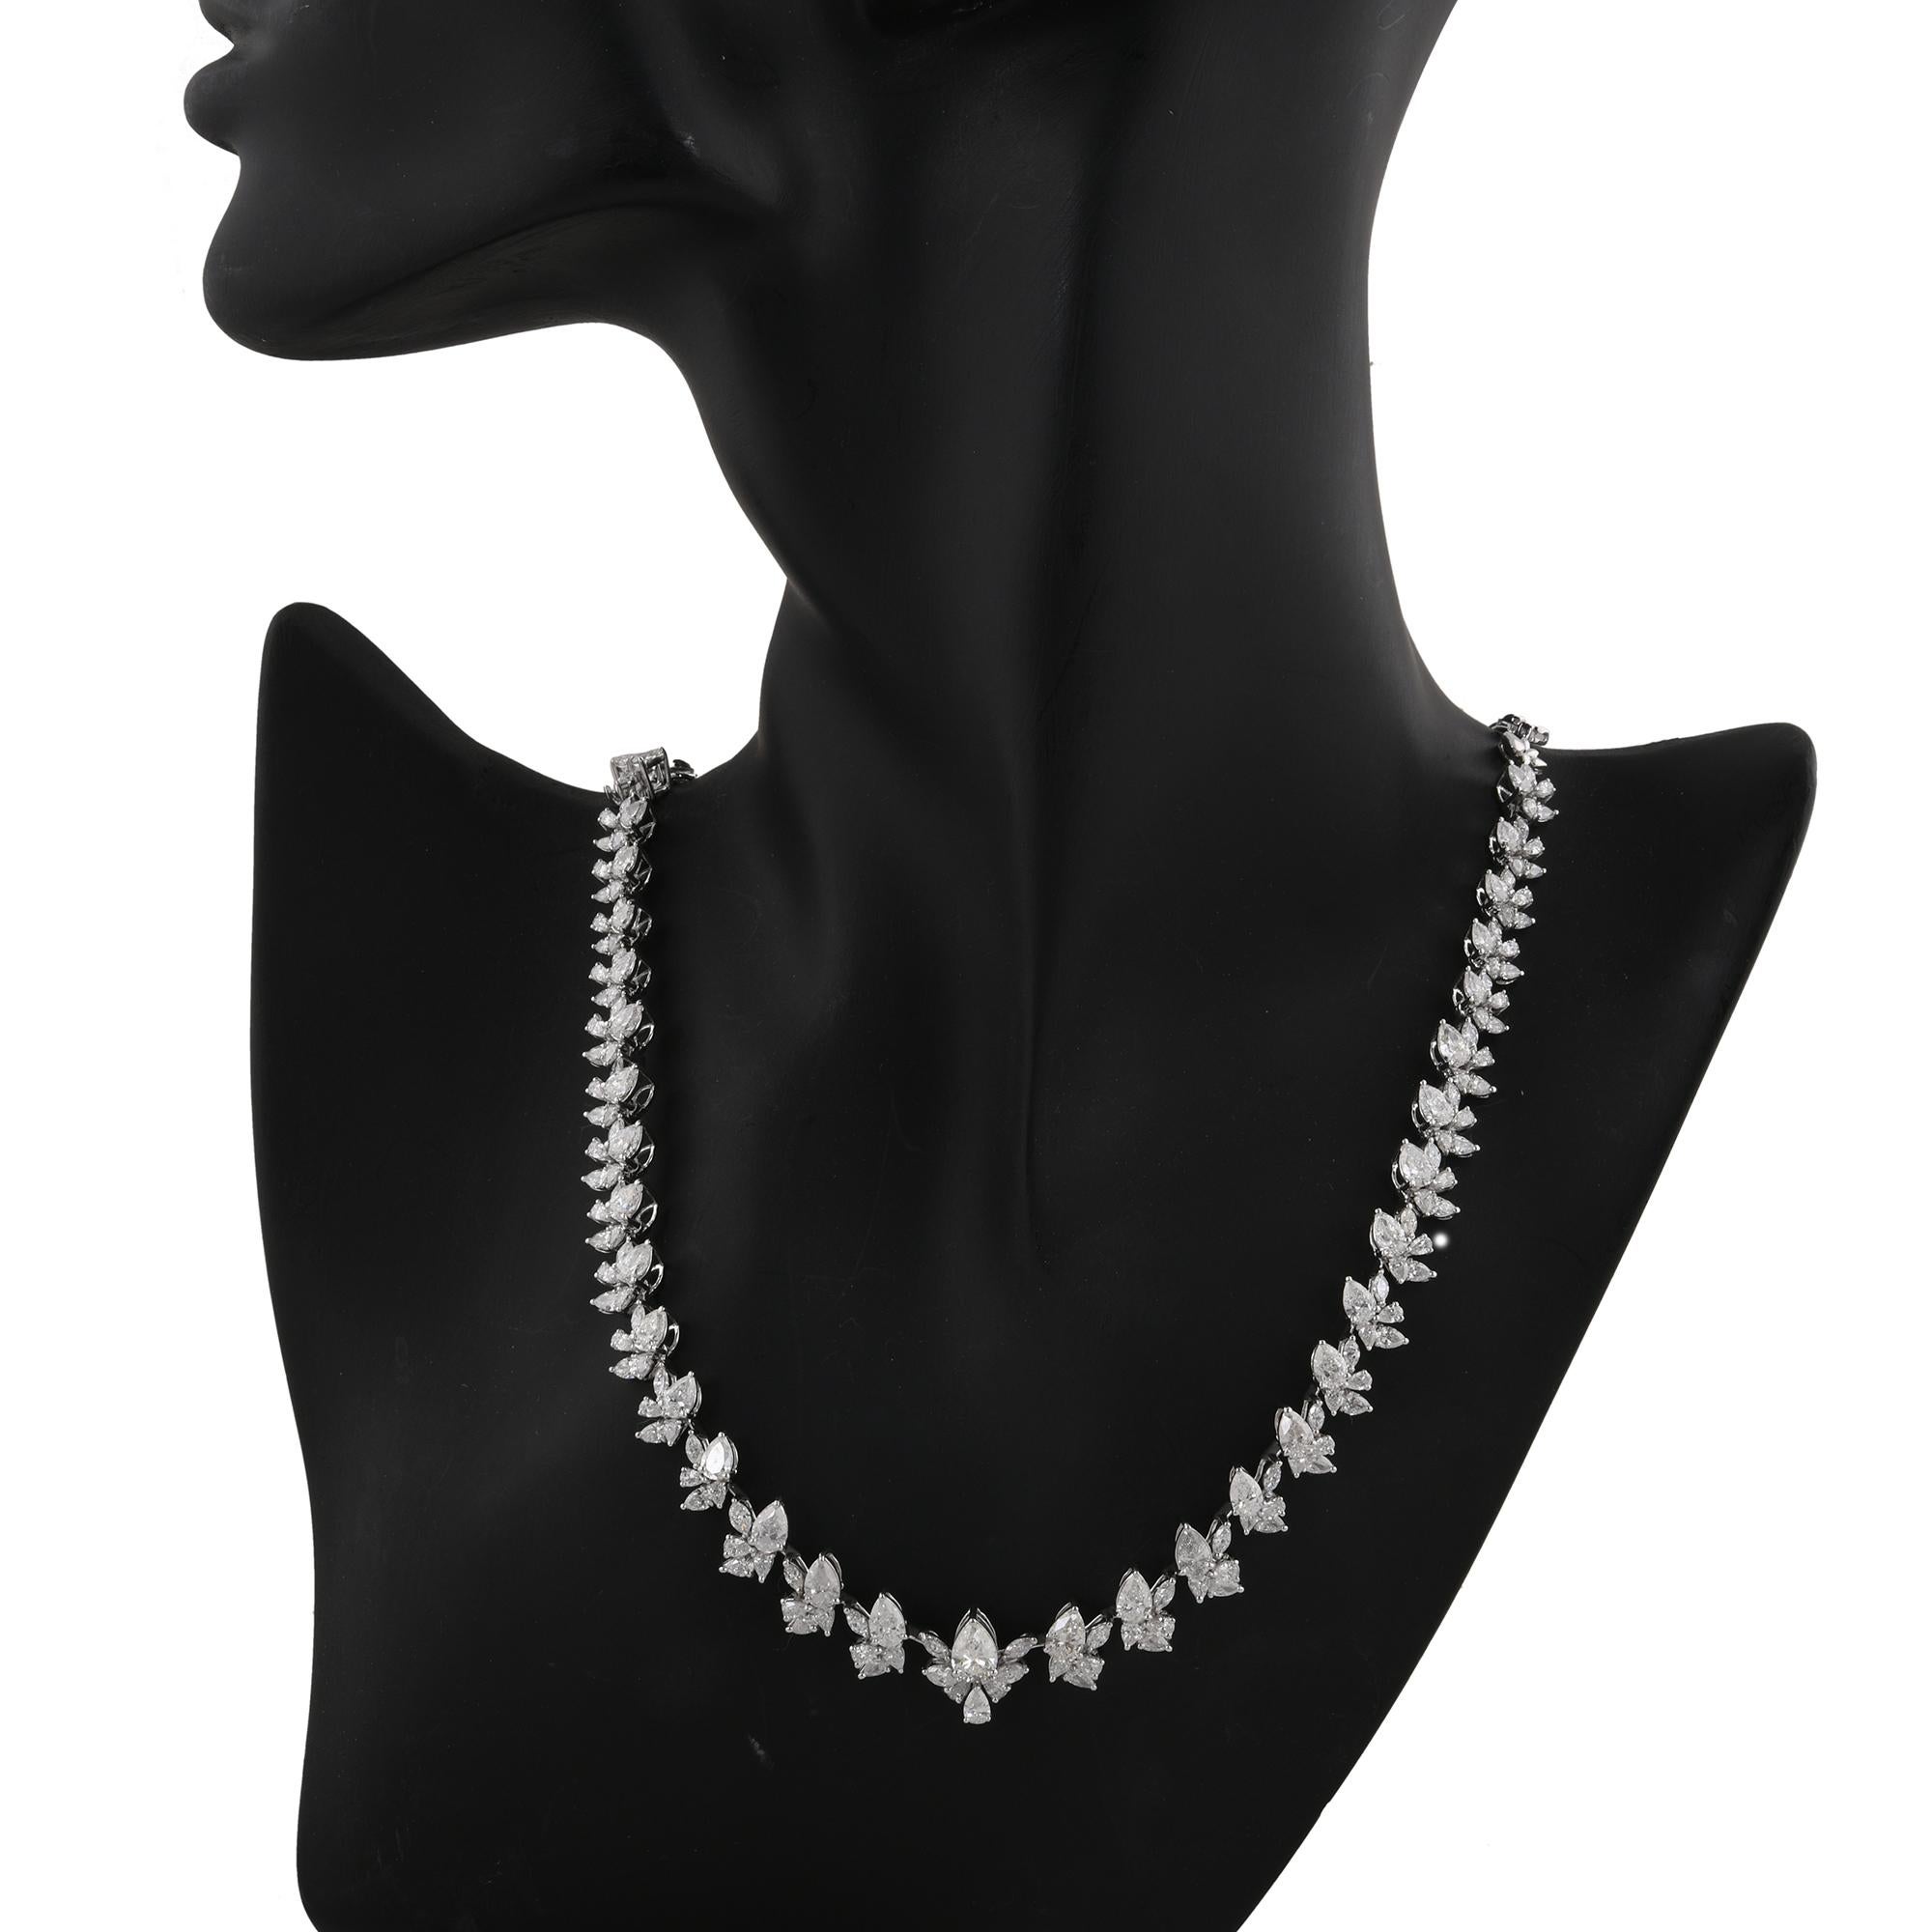 Modern 15.39 Ct SI Clarity HI Color Pear Diamond Necklace 18 Karat White Gold Jewelry For Sale